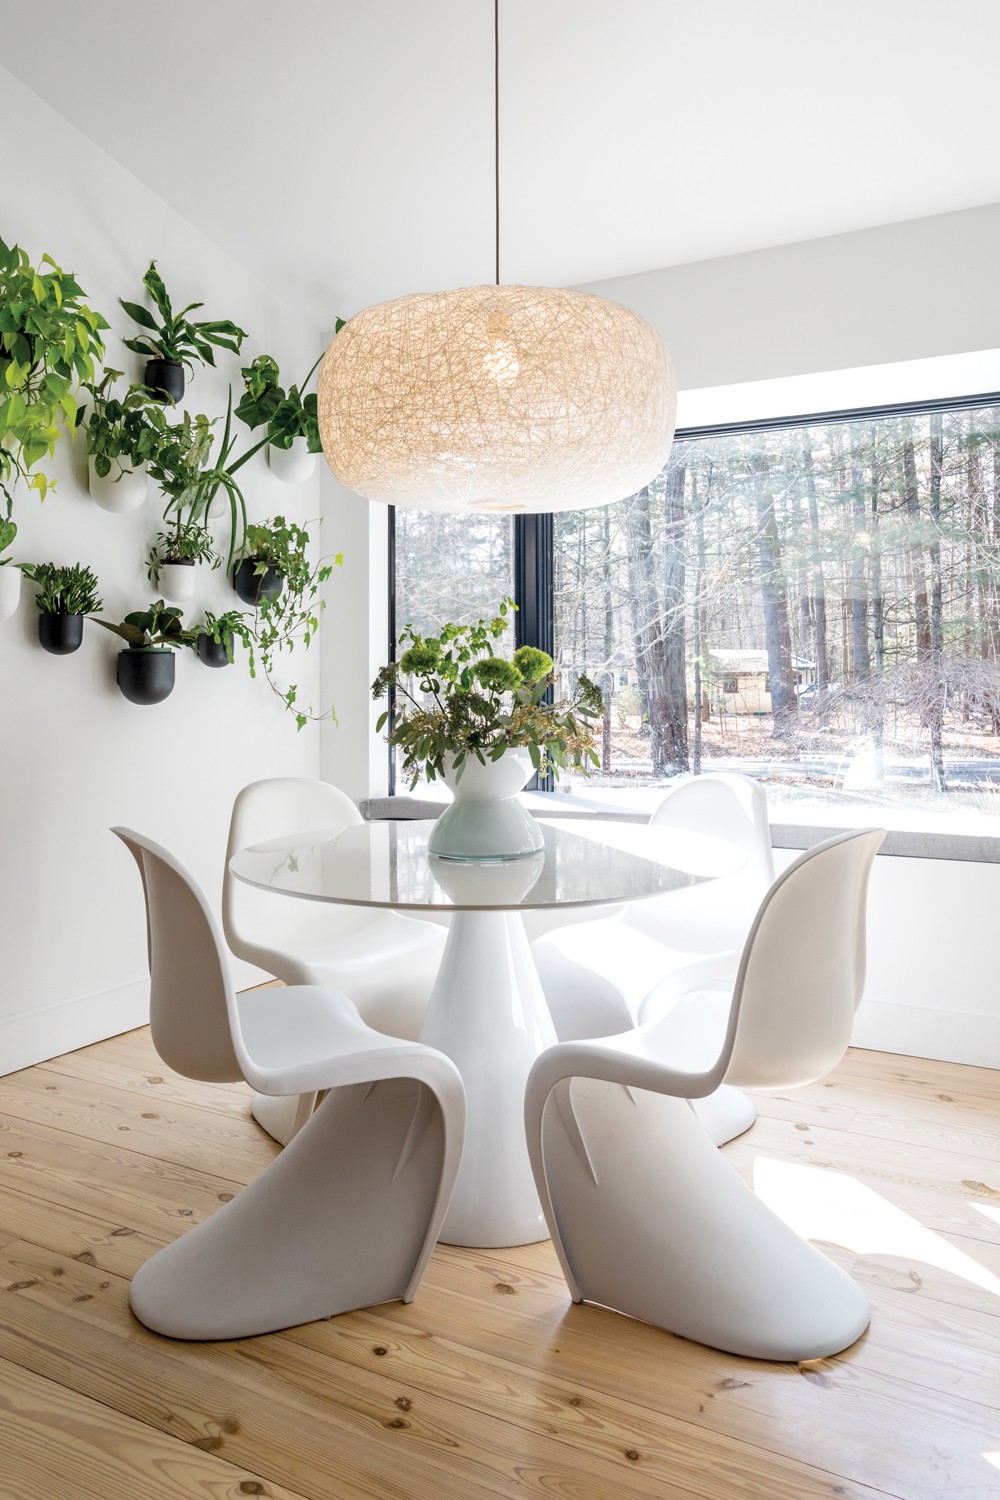 Sun floods into Oldenburger and Smykowski’s kitchen, - even on winter days. The thriving wall garden adds layers of - green to the beige-on-white design. Oldenburger found two - of the Vernor Panton chairs by Vitra at a vintage shop and - matched them with a round table and pillar pedestal base. - The wall pots and hanging lamp are both by West Elm. “I do - love plants,” she says. “I try to have live plants throughout - the house and encourage my clients to also.” - PHOTO BY WINONA BARTON BALLENTINE